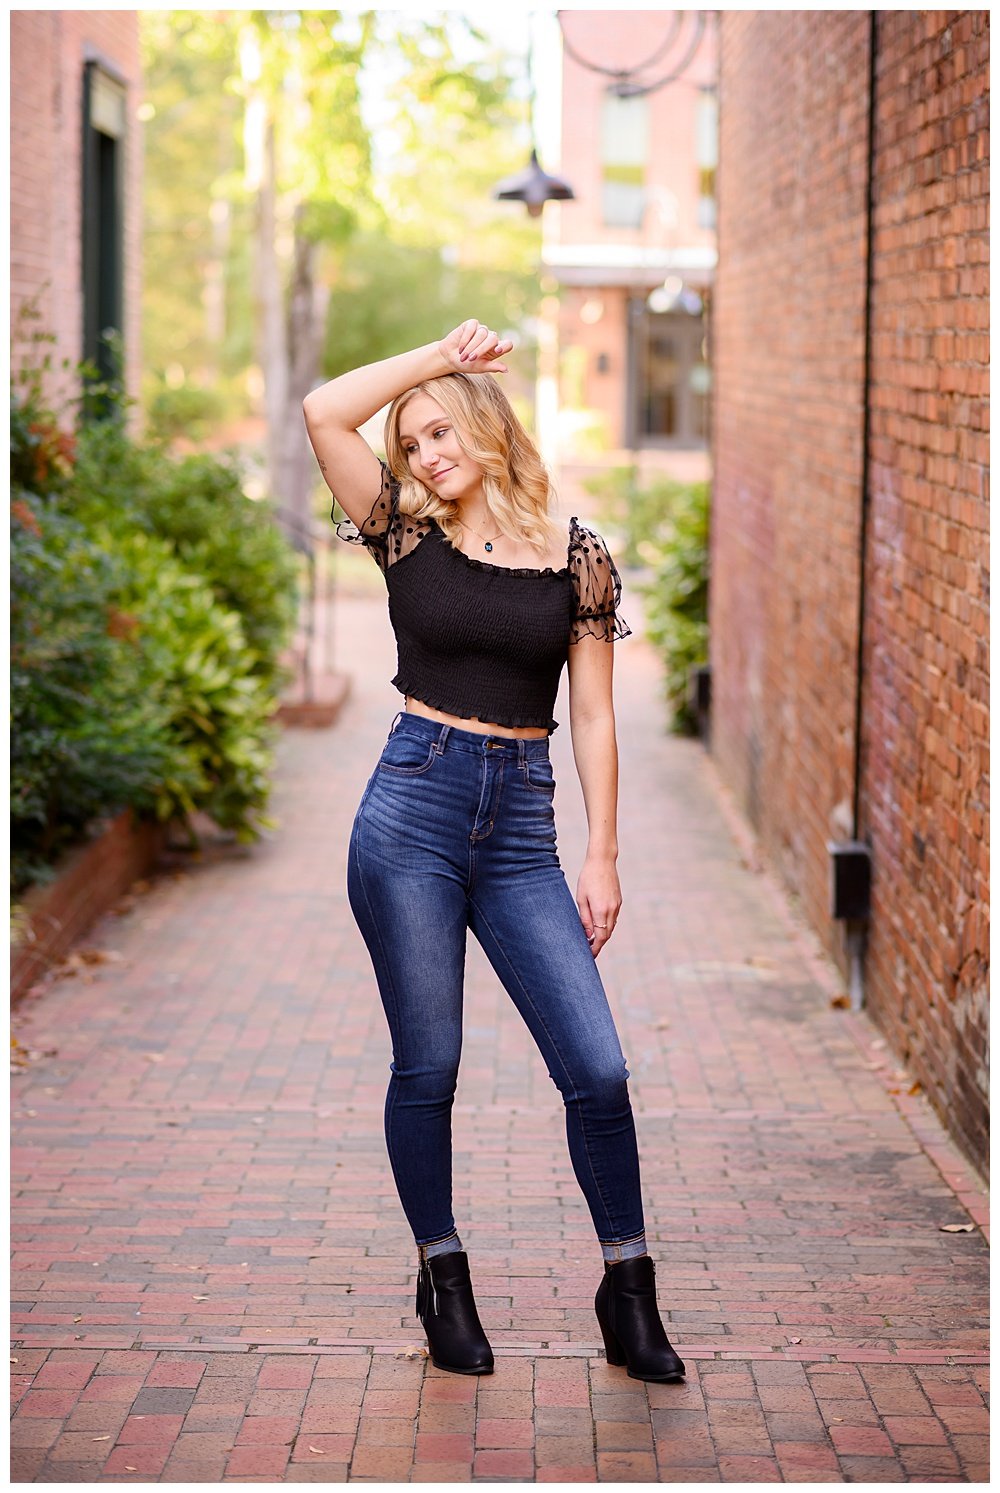 Editorial Senior Picture in downtown Southern Pines Alley by NC Senior Portrait Photographer Jamie Loomis.